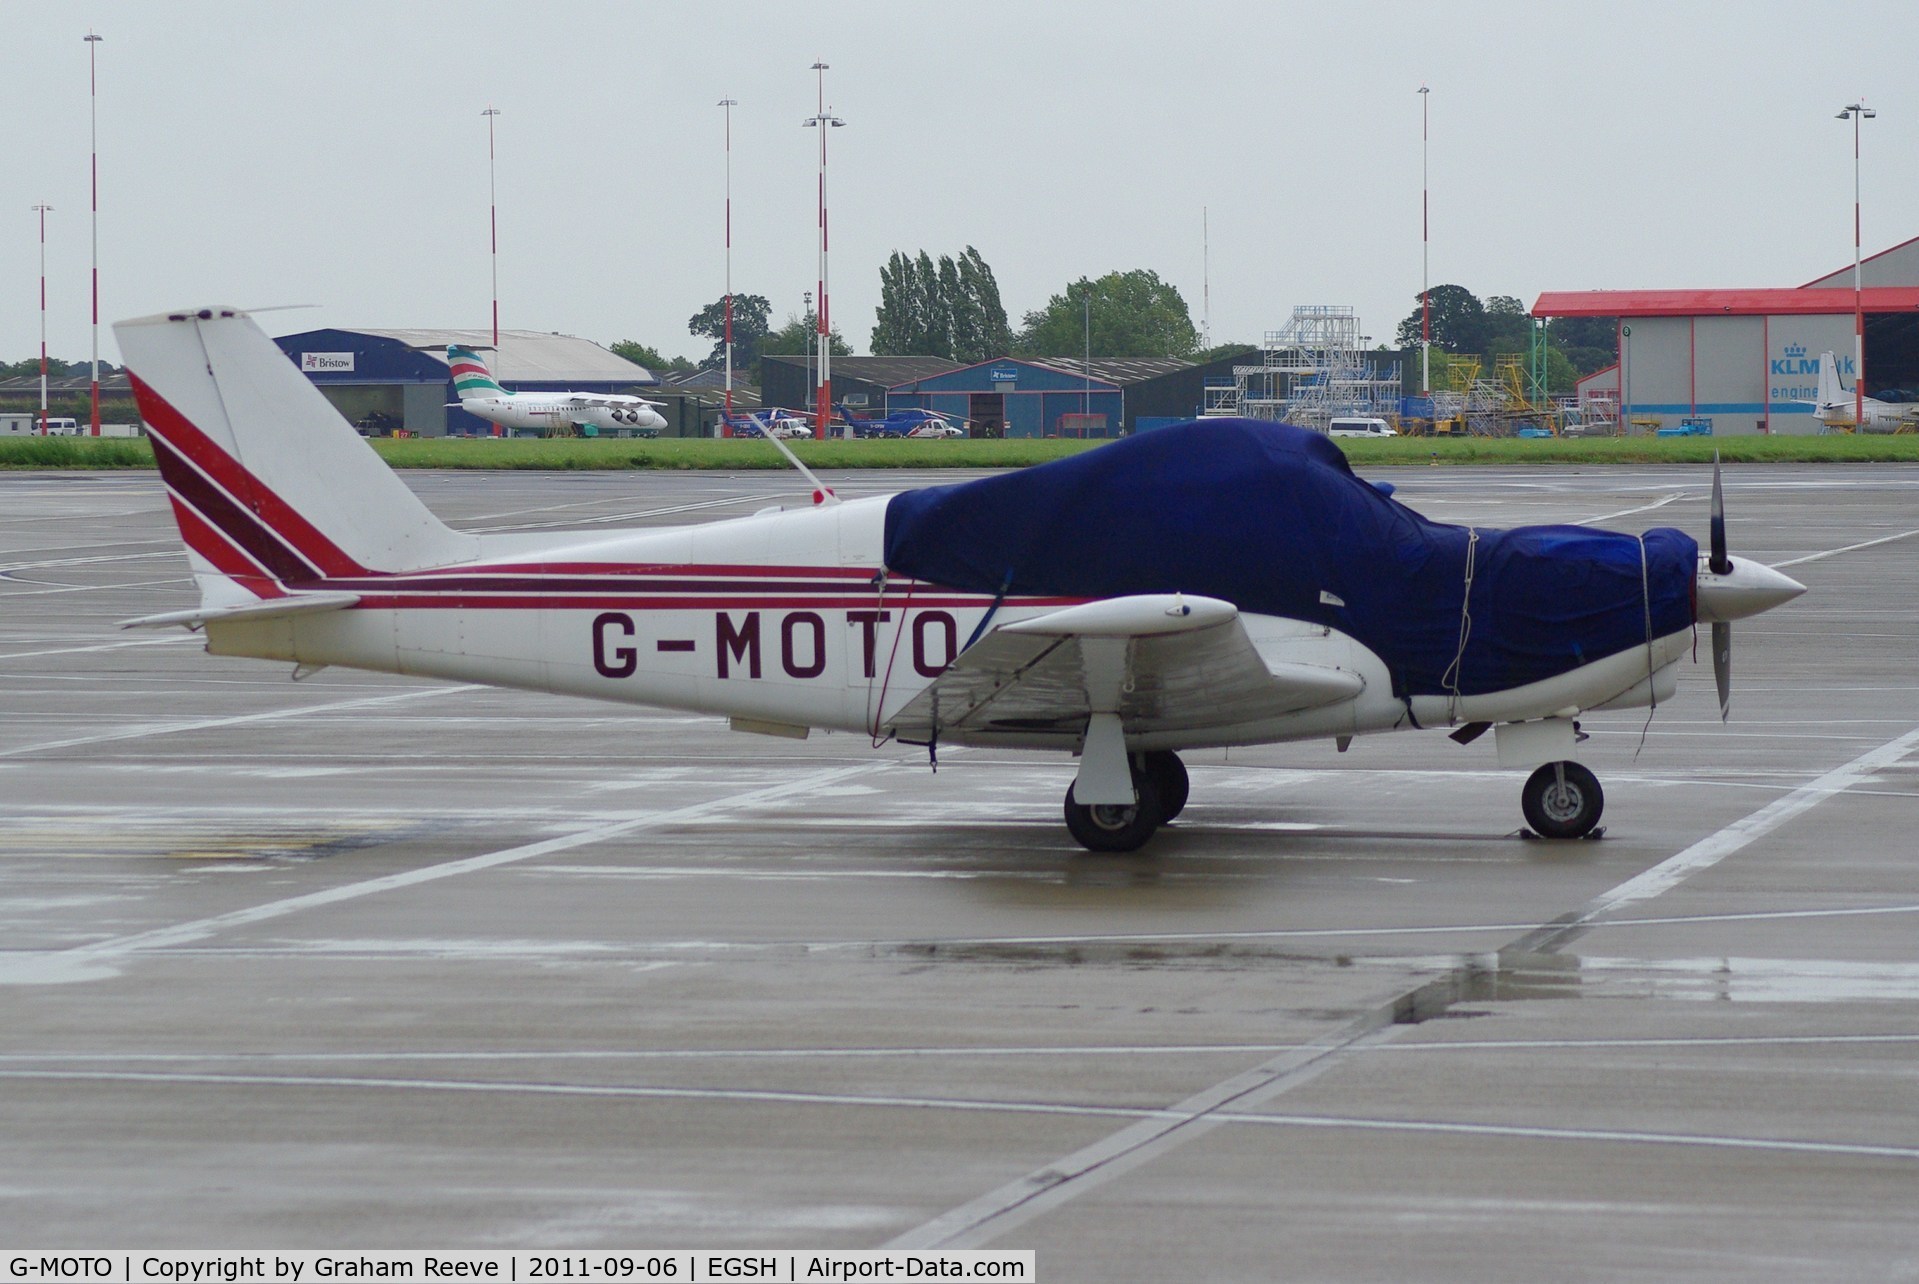 G-MOTO, 1962 Piper PA-24-180 Comanche Comanche C/N 24-3239, Parked on a wet and windy morning.